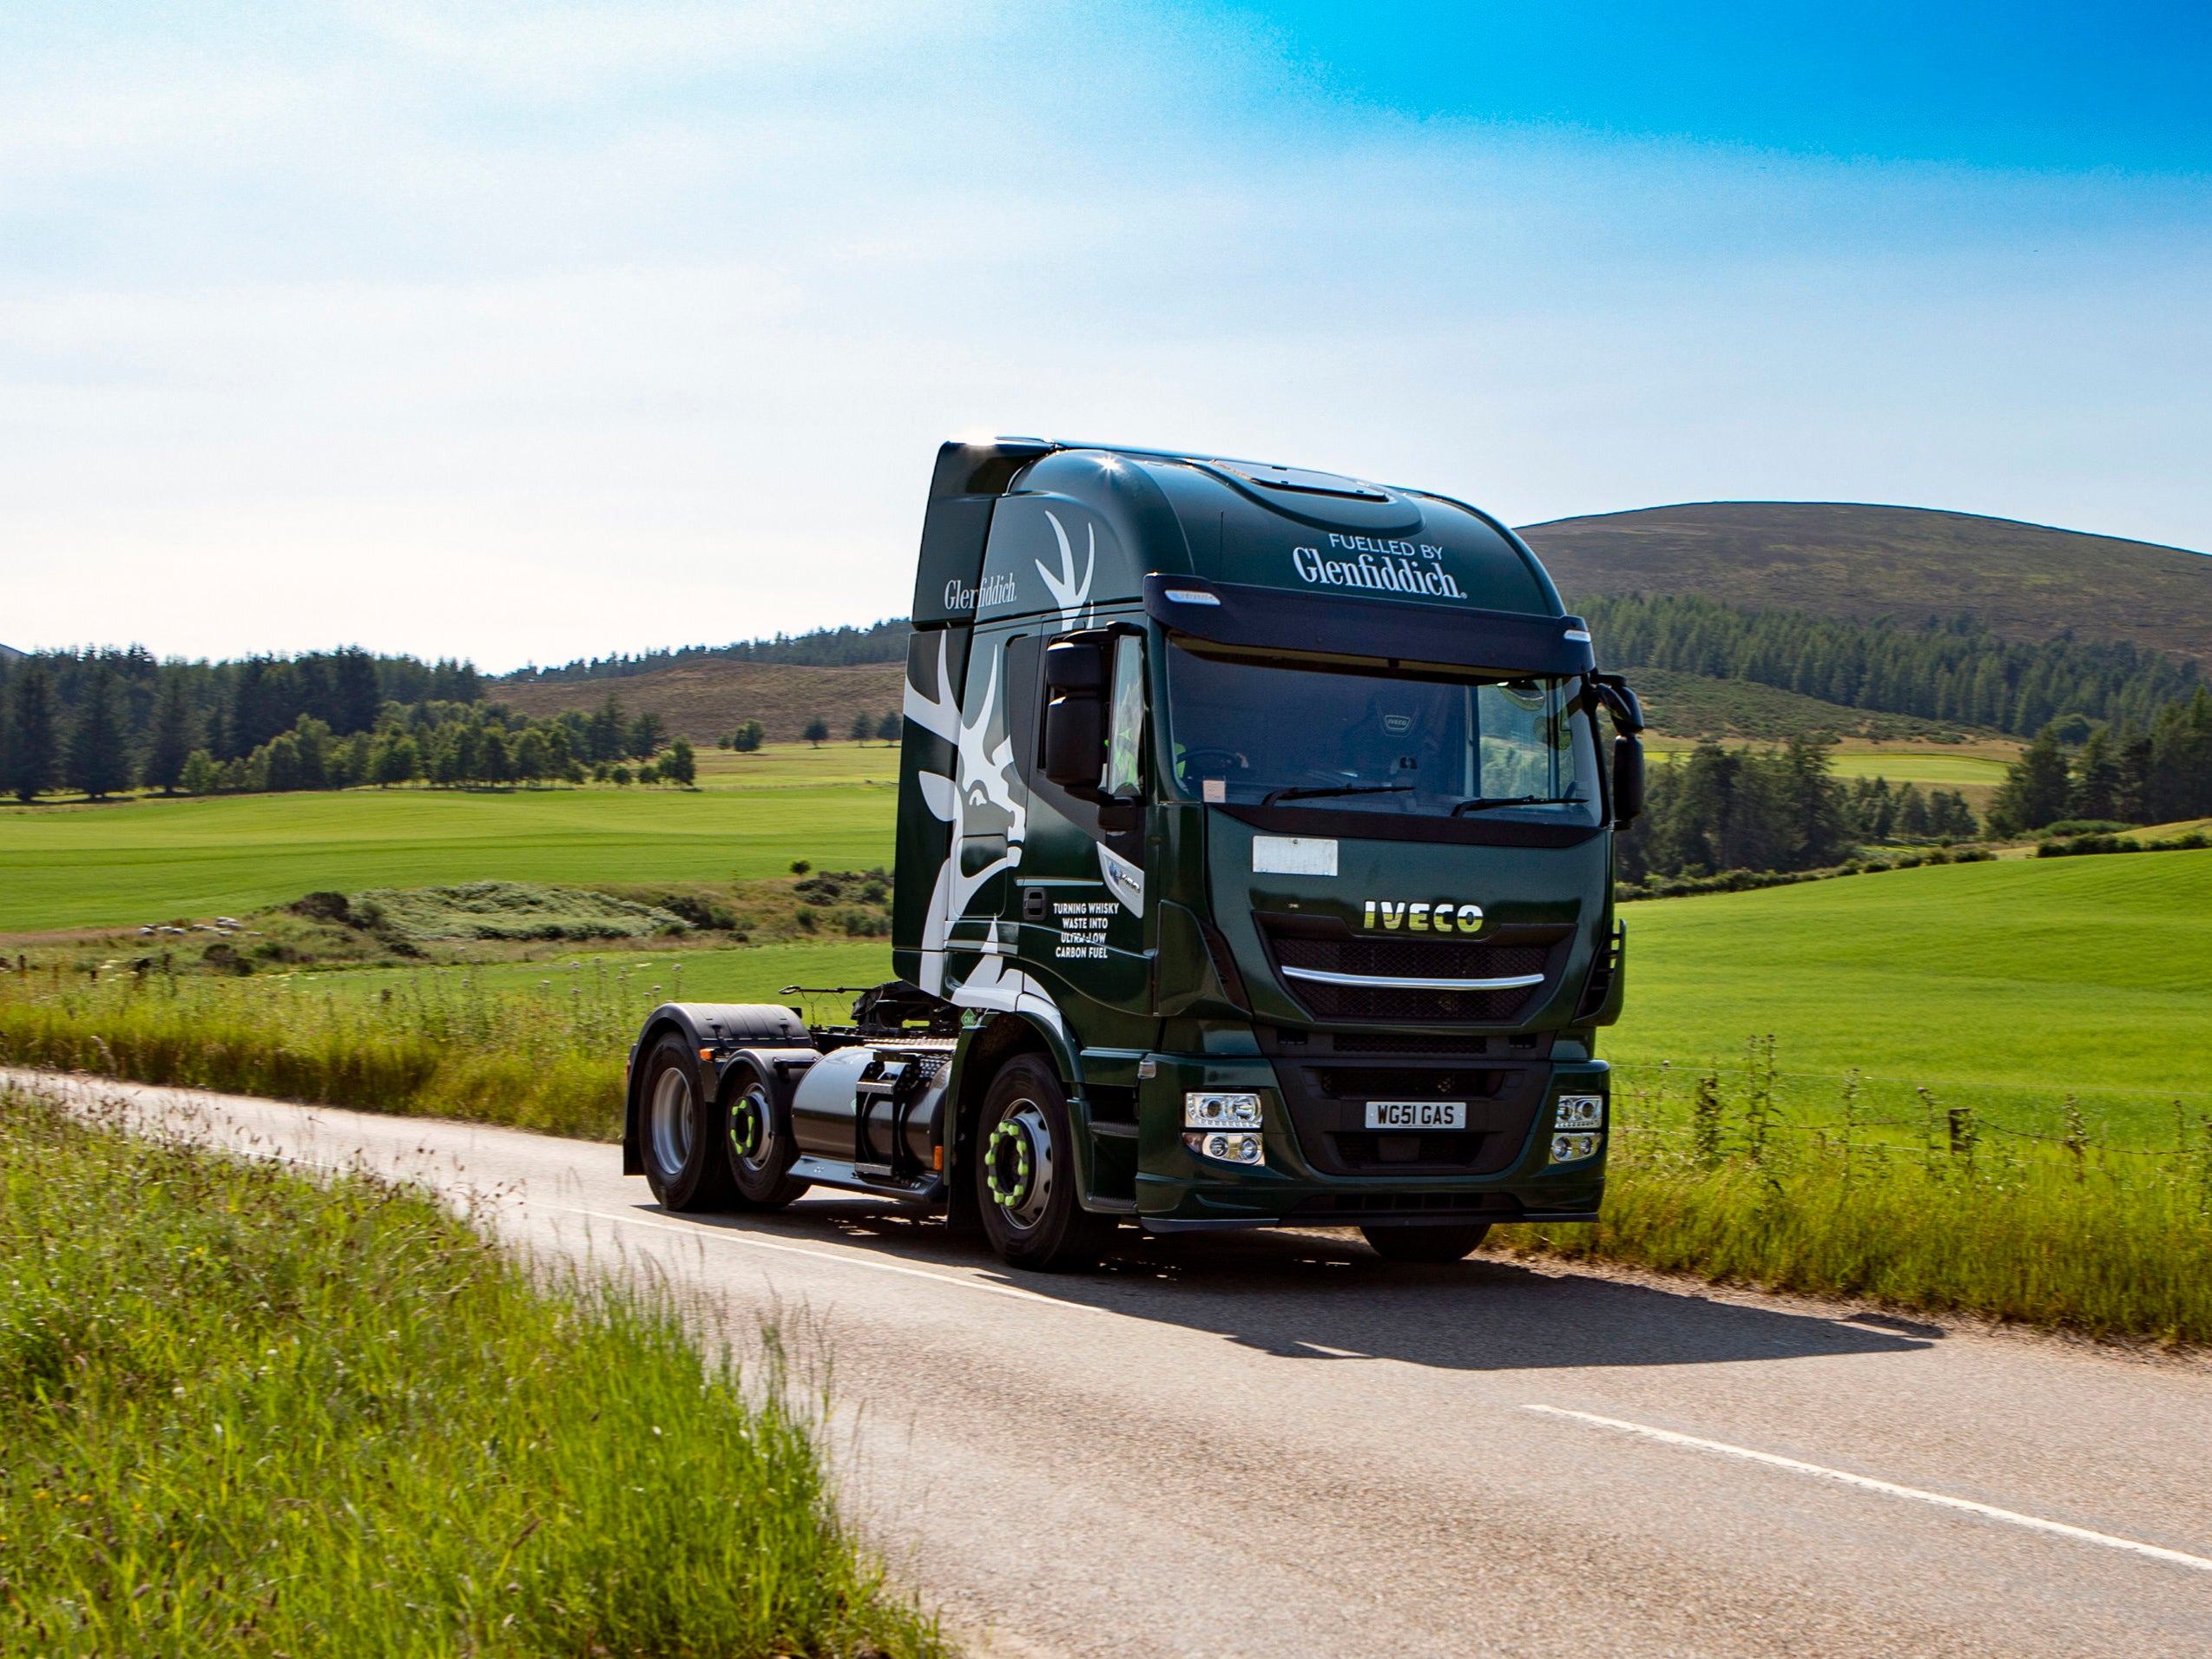 The leading single malt Scotch whisky company says its entire delivery fleet will run on “green biogas” created from distillery residues